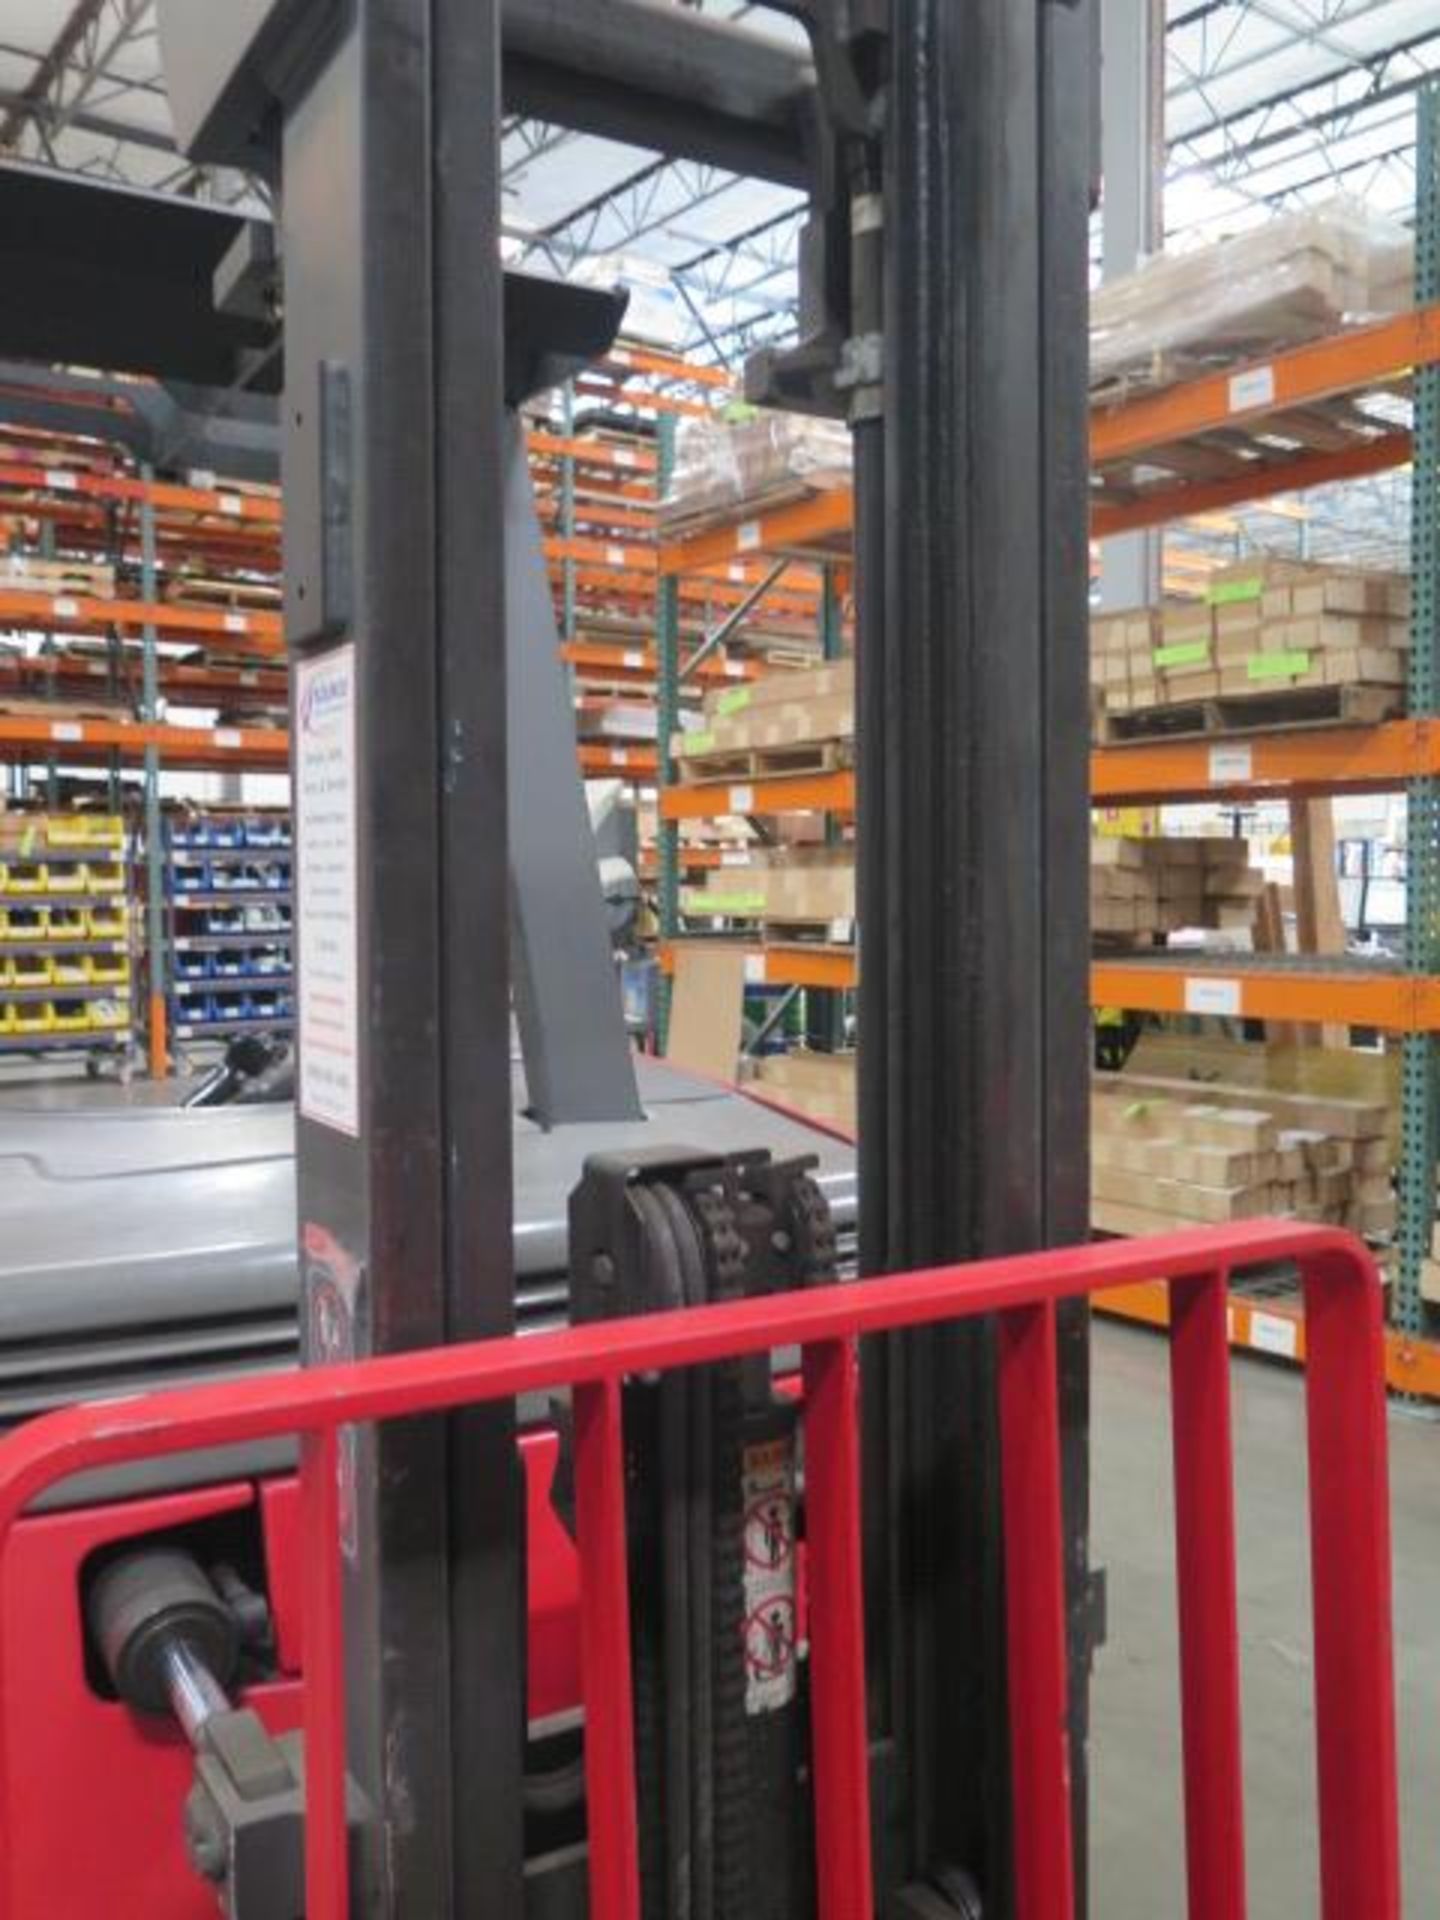 2007 Raymond R50-C50TF 5000 Lb, Standing Elec Forklift s/n R50-07-13193 w/ 2-Stage Mast, SOLD AS IS - Image 7 of 11